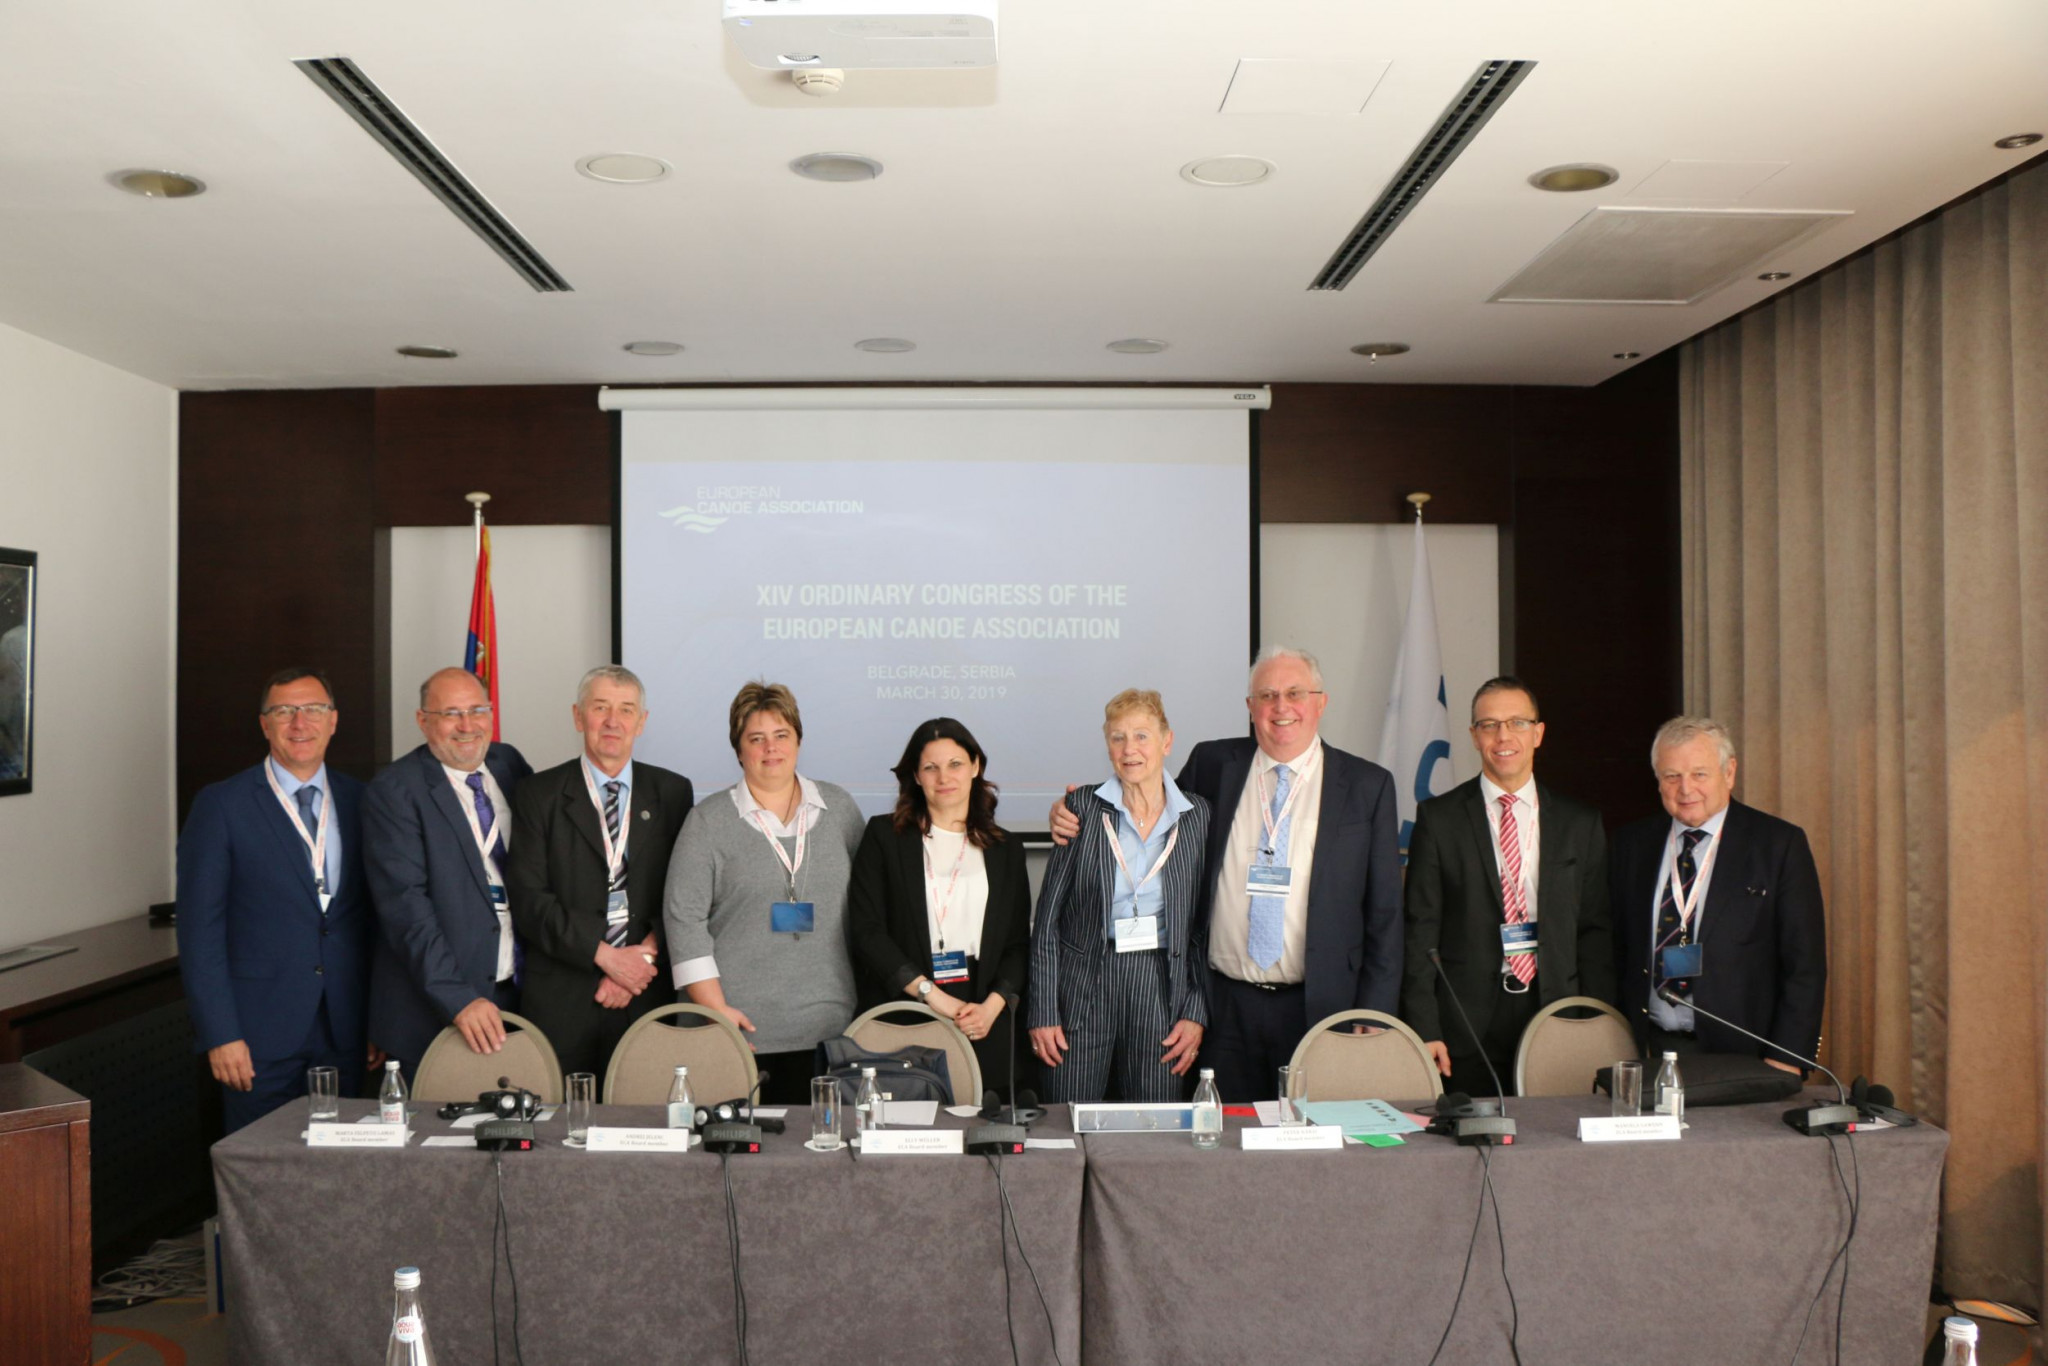 Woods re-elected unopposed as European Canoe Association President 